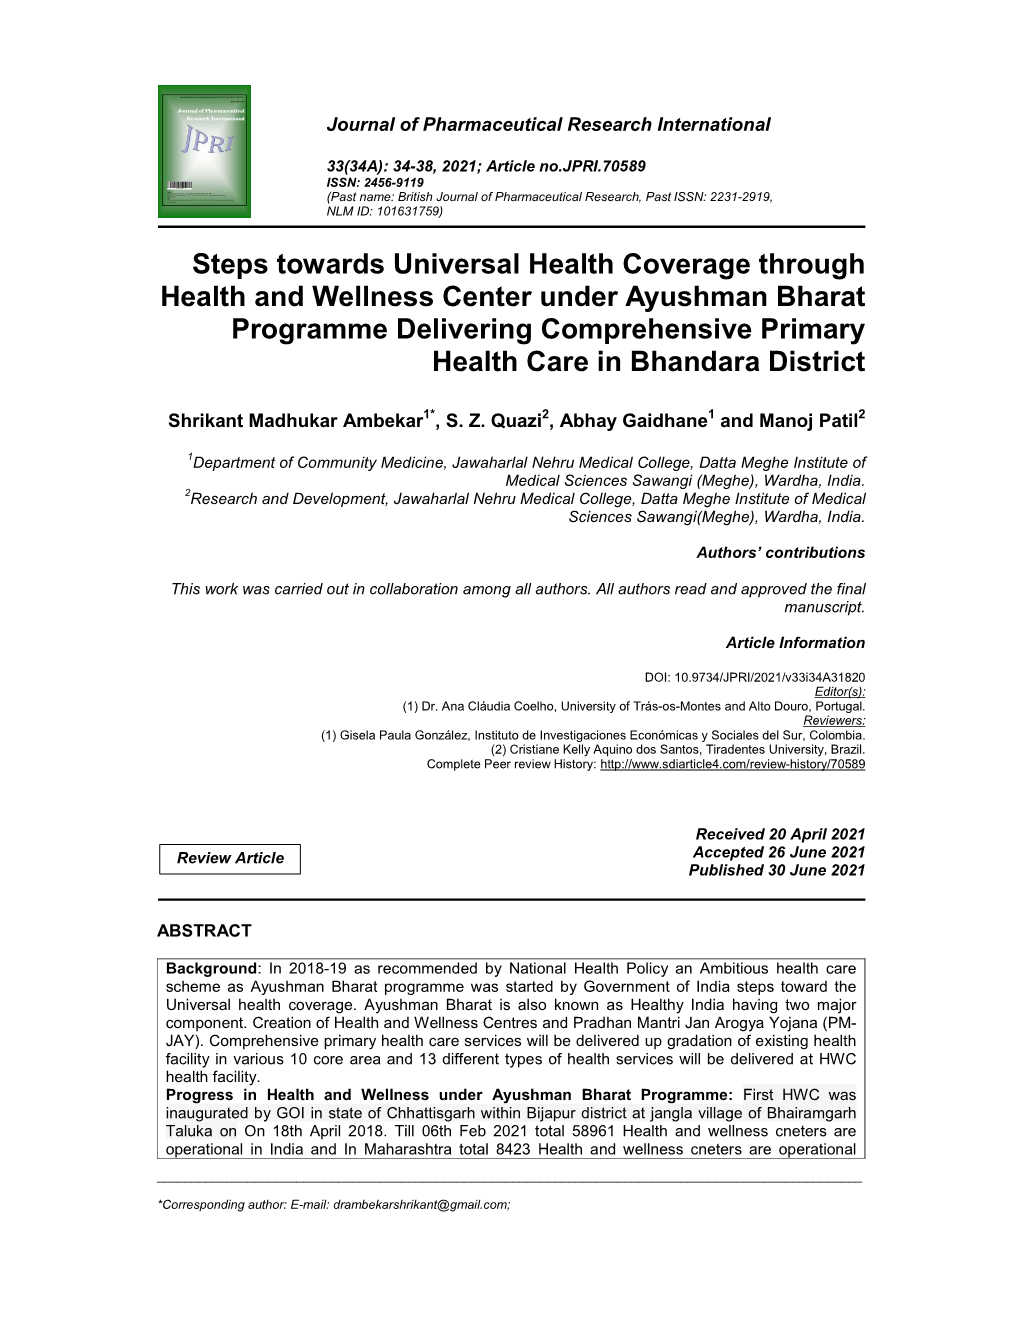 Steps Towards Universal Health Coverage Through Health And